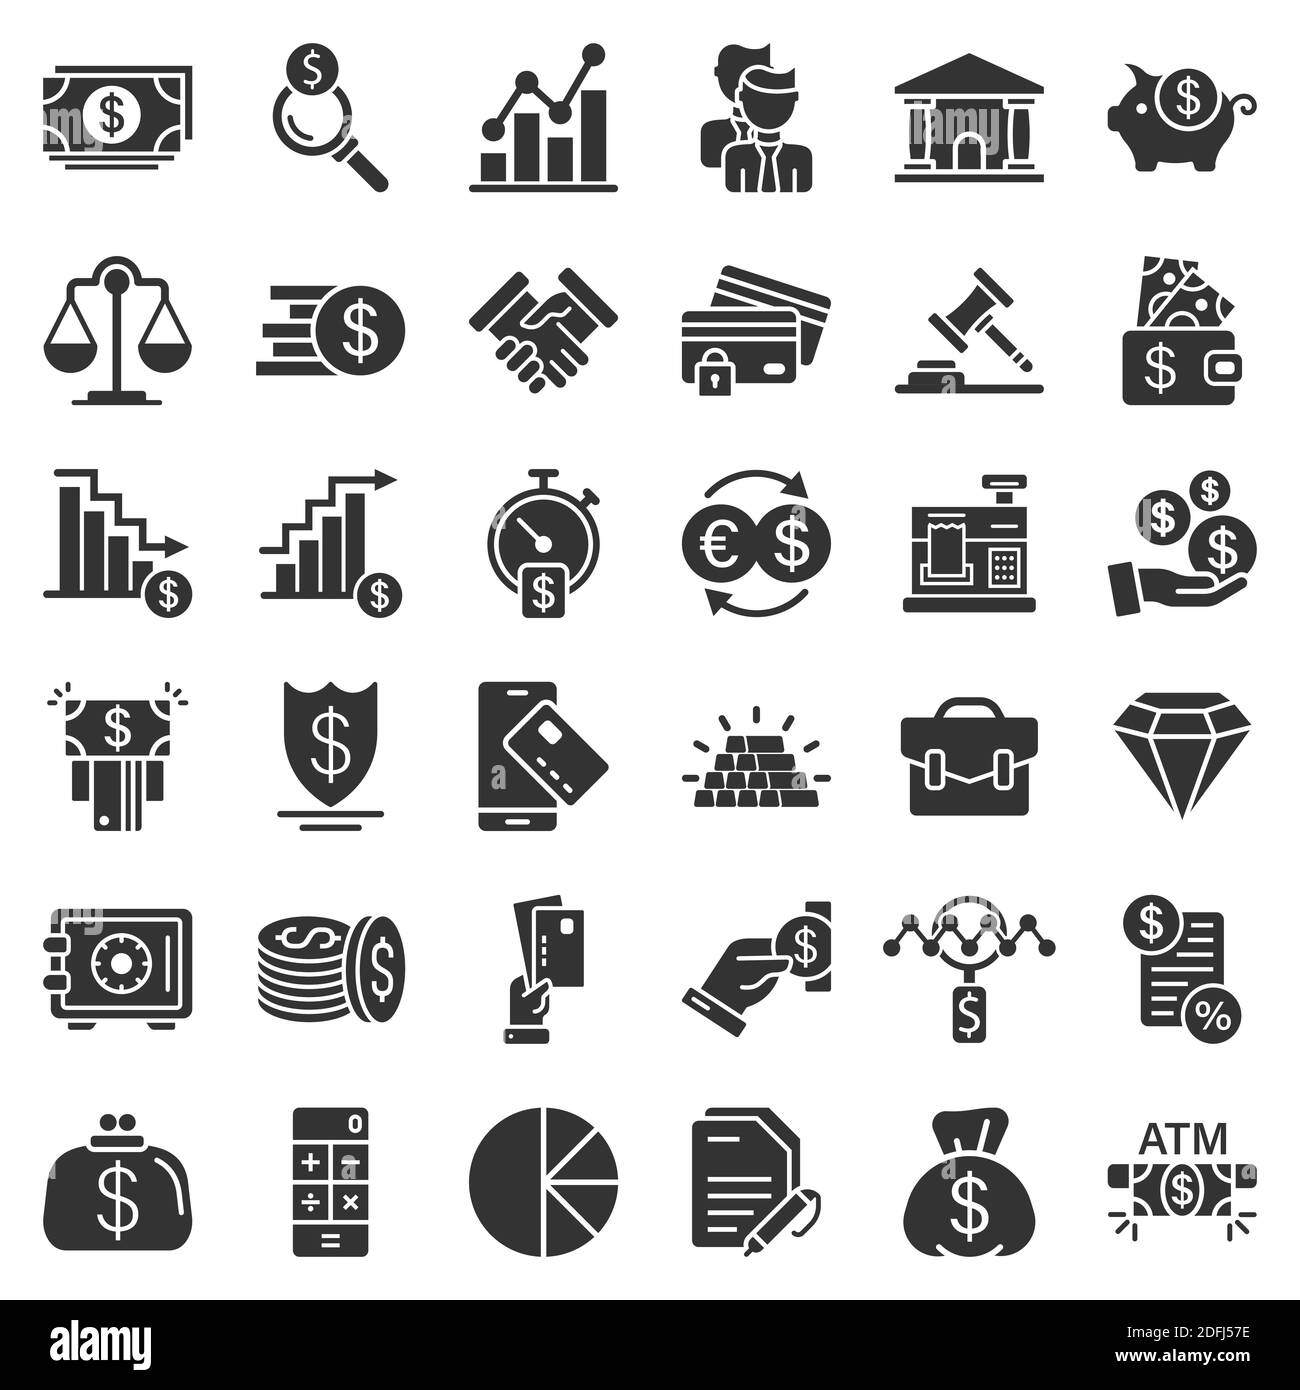 Business thin line icon set in flat style. Finance investment vector illustration on white isolated background. Financial currency business concept. Stock Vector